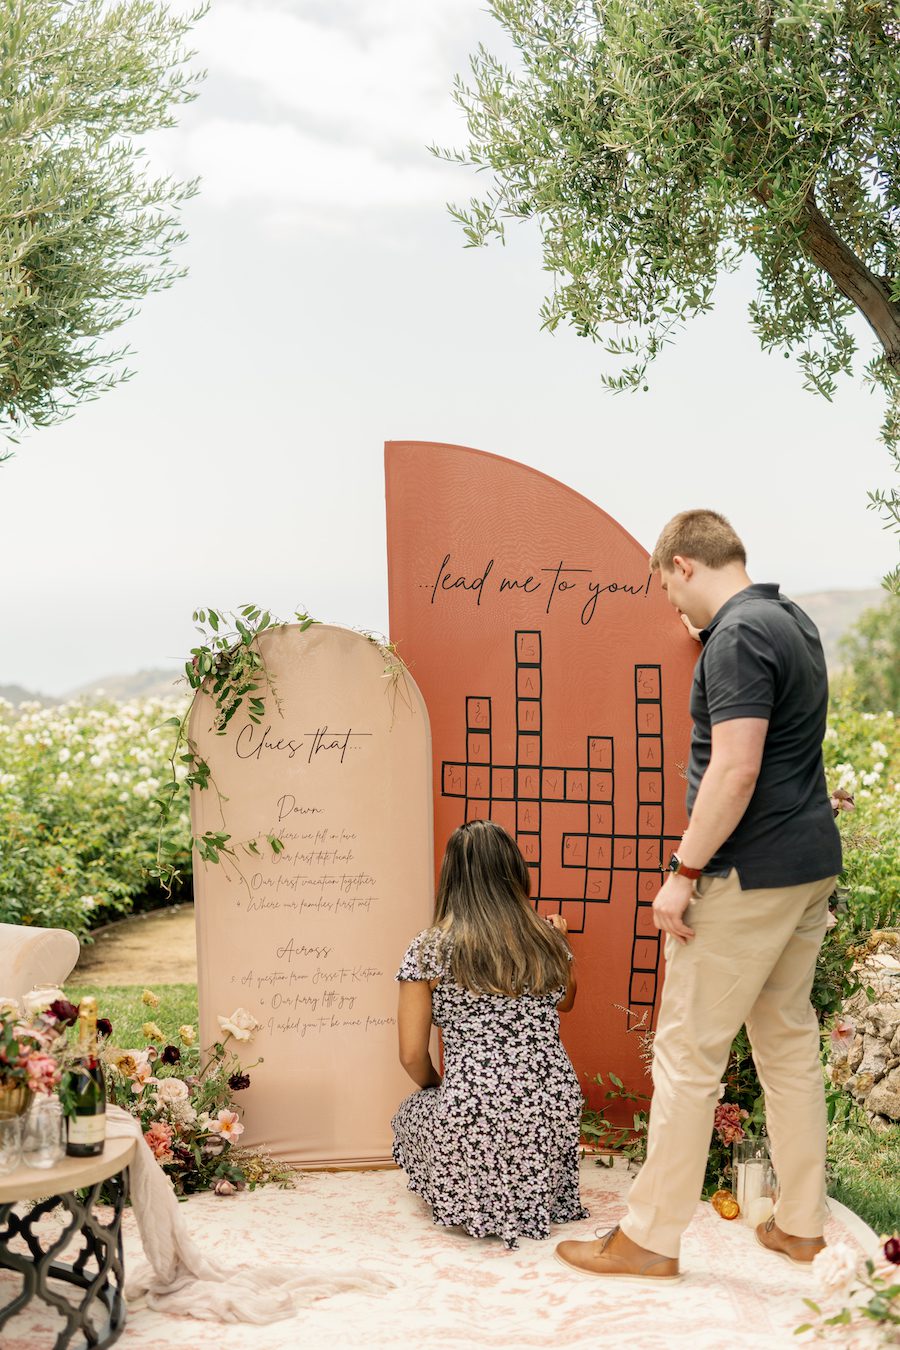 Romanic, Intimate, and Creative Malibu Proposal. With custom details and backdrops. This cozy proposal with gorgeous florals was nestled in the mountains of Malibu. 